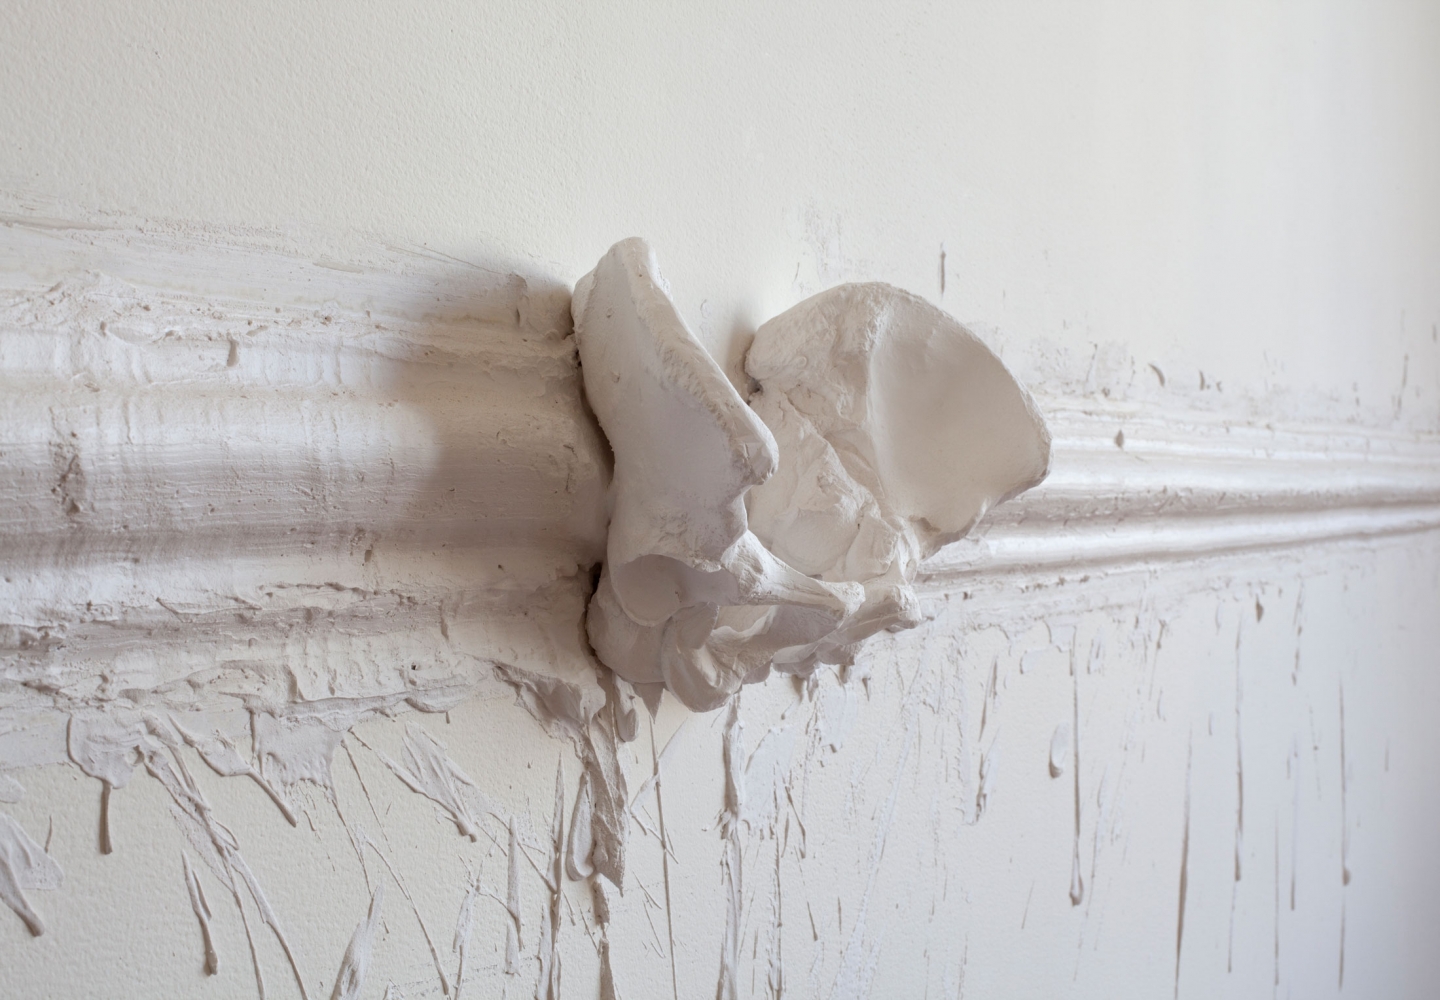 Janine Antoni
Crowned, 2013
Plaster molding with plaster pelvic bones
Dimensions variable, site-transferrable installation
Edition of 5 and 1 artist&amp;#39;s proof&amp;nbsp;
Installation view Anthony Meier Fine Arts, San Francisco, 2015